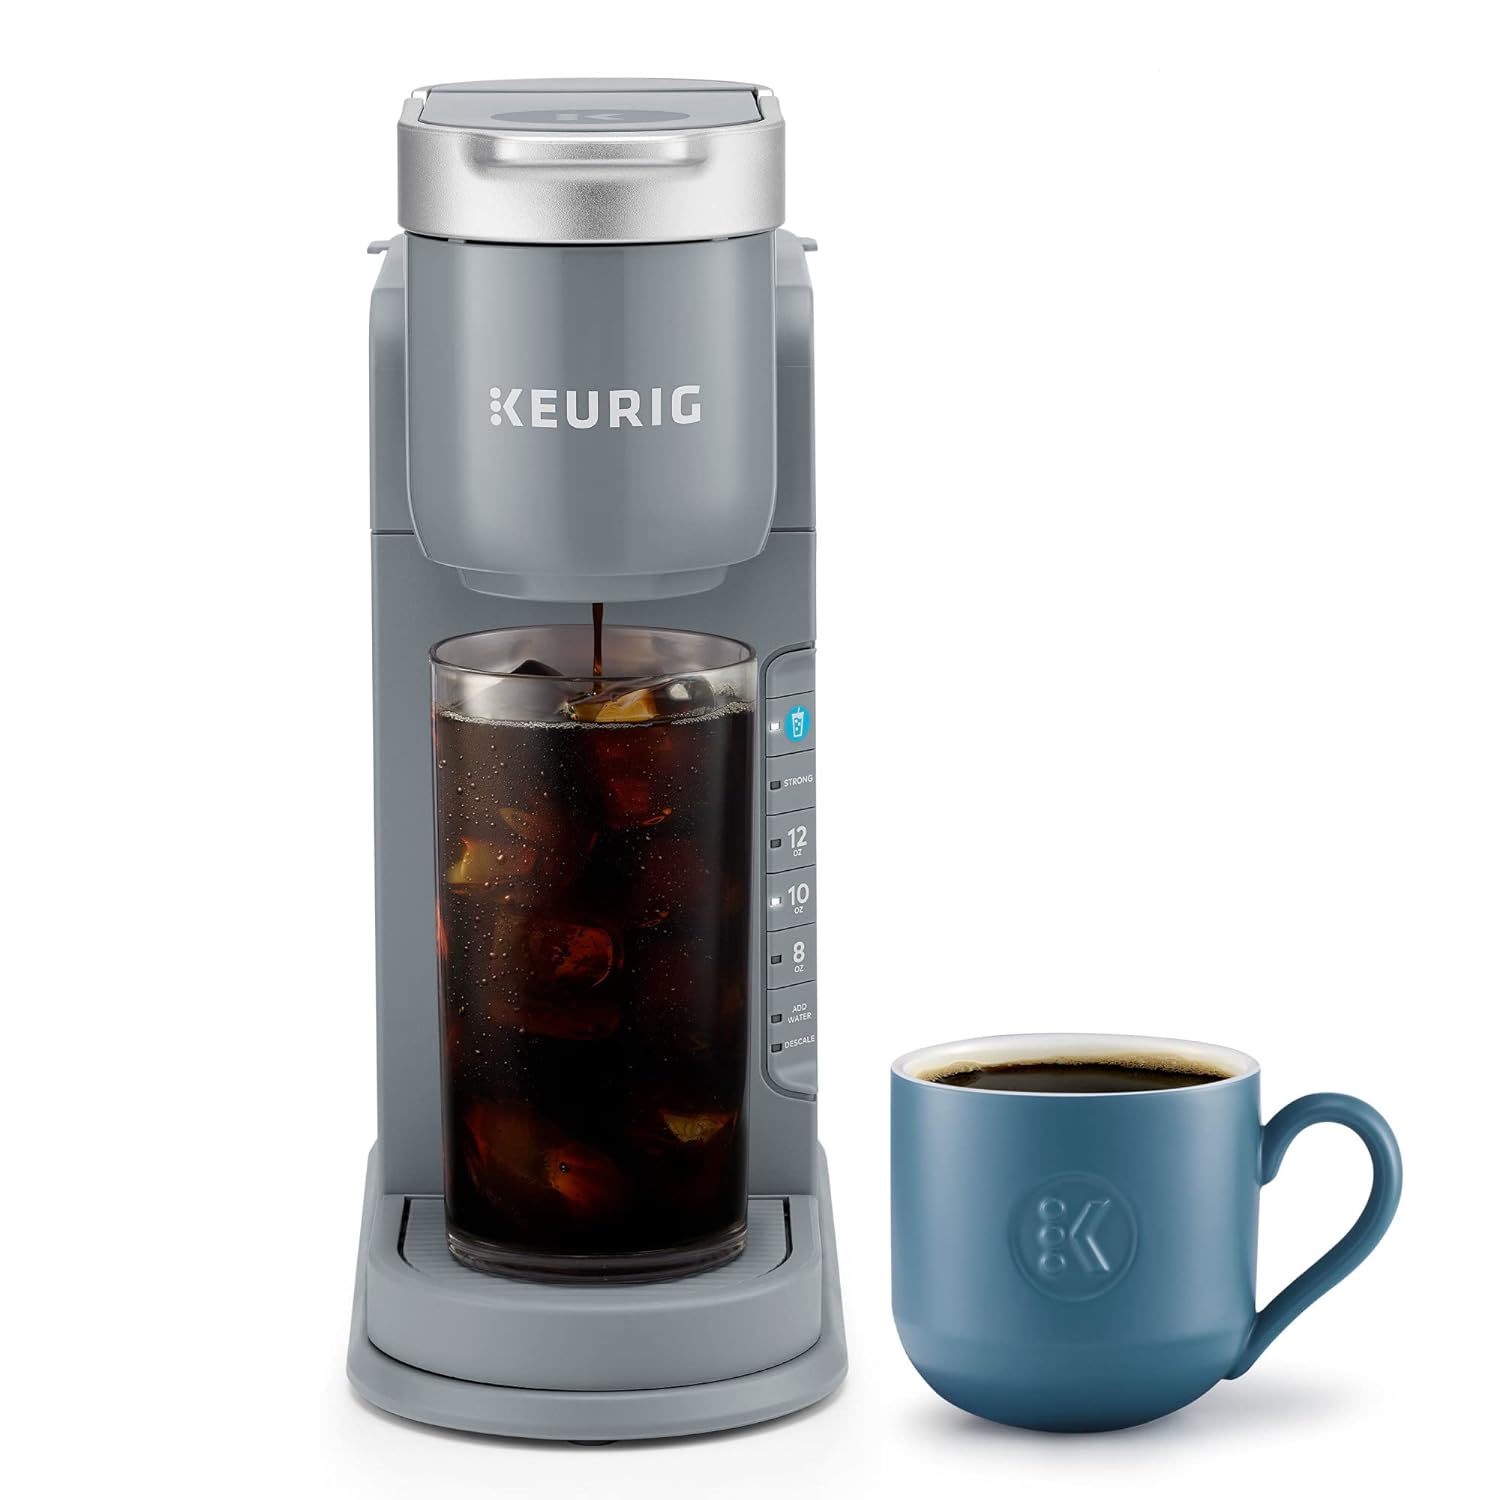 Primary image for Keurig K-Iced Coffee Maker, Single Serve K-Cup Pod Iced Coffee Maker, With Hot a